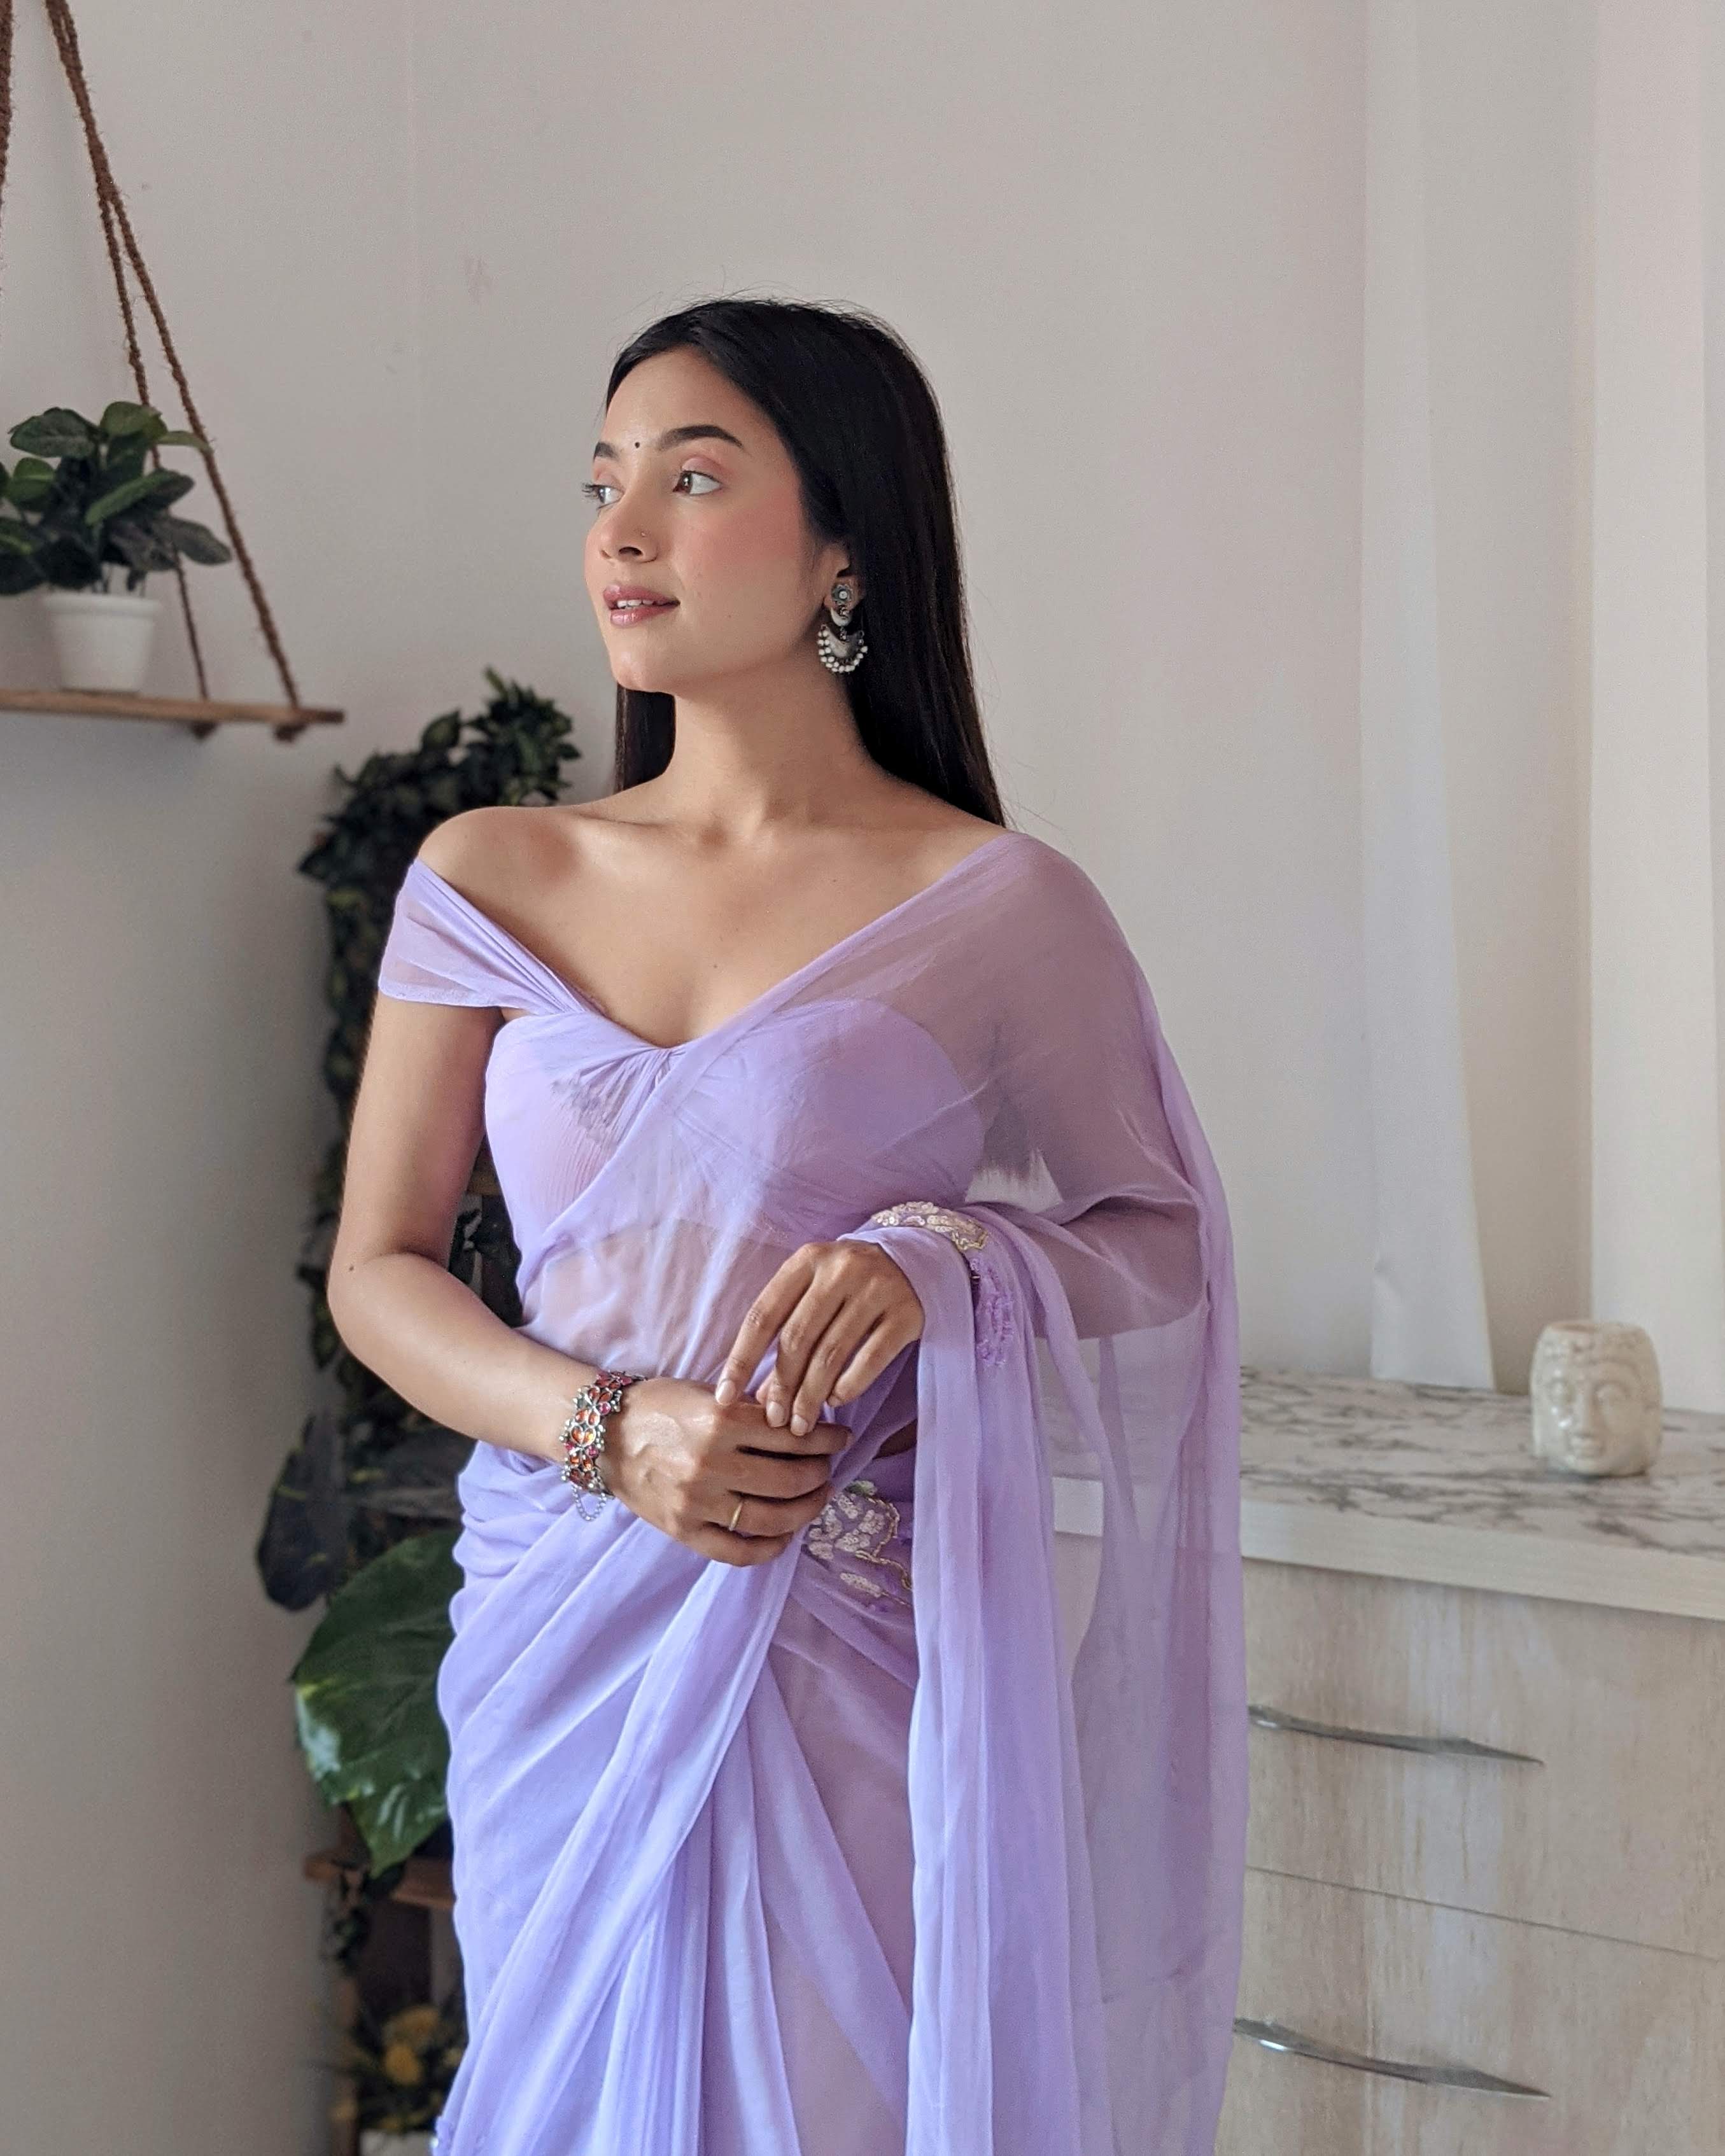 Sequins work Chiffon Saree in Lavender Color - Saree Set ( Picco+Fall+Pre-stitched+Stitched Blouse)